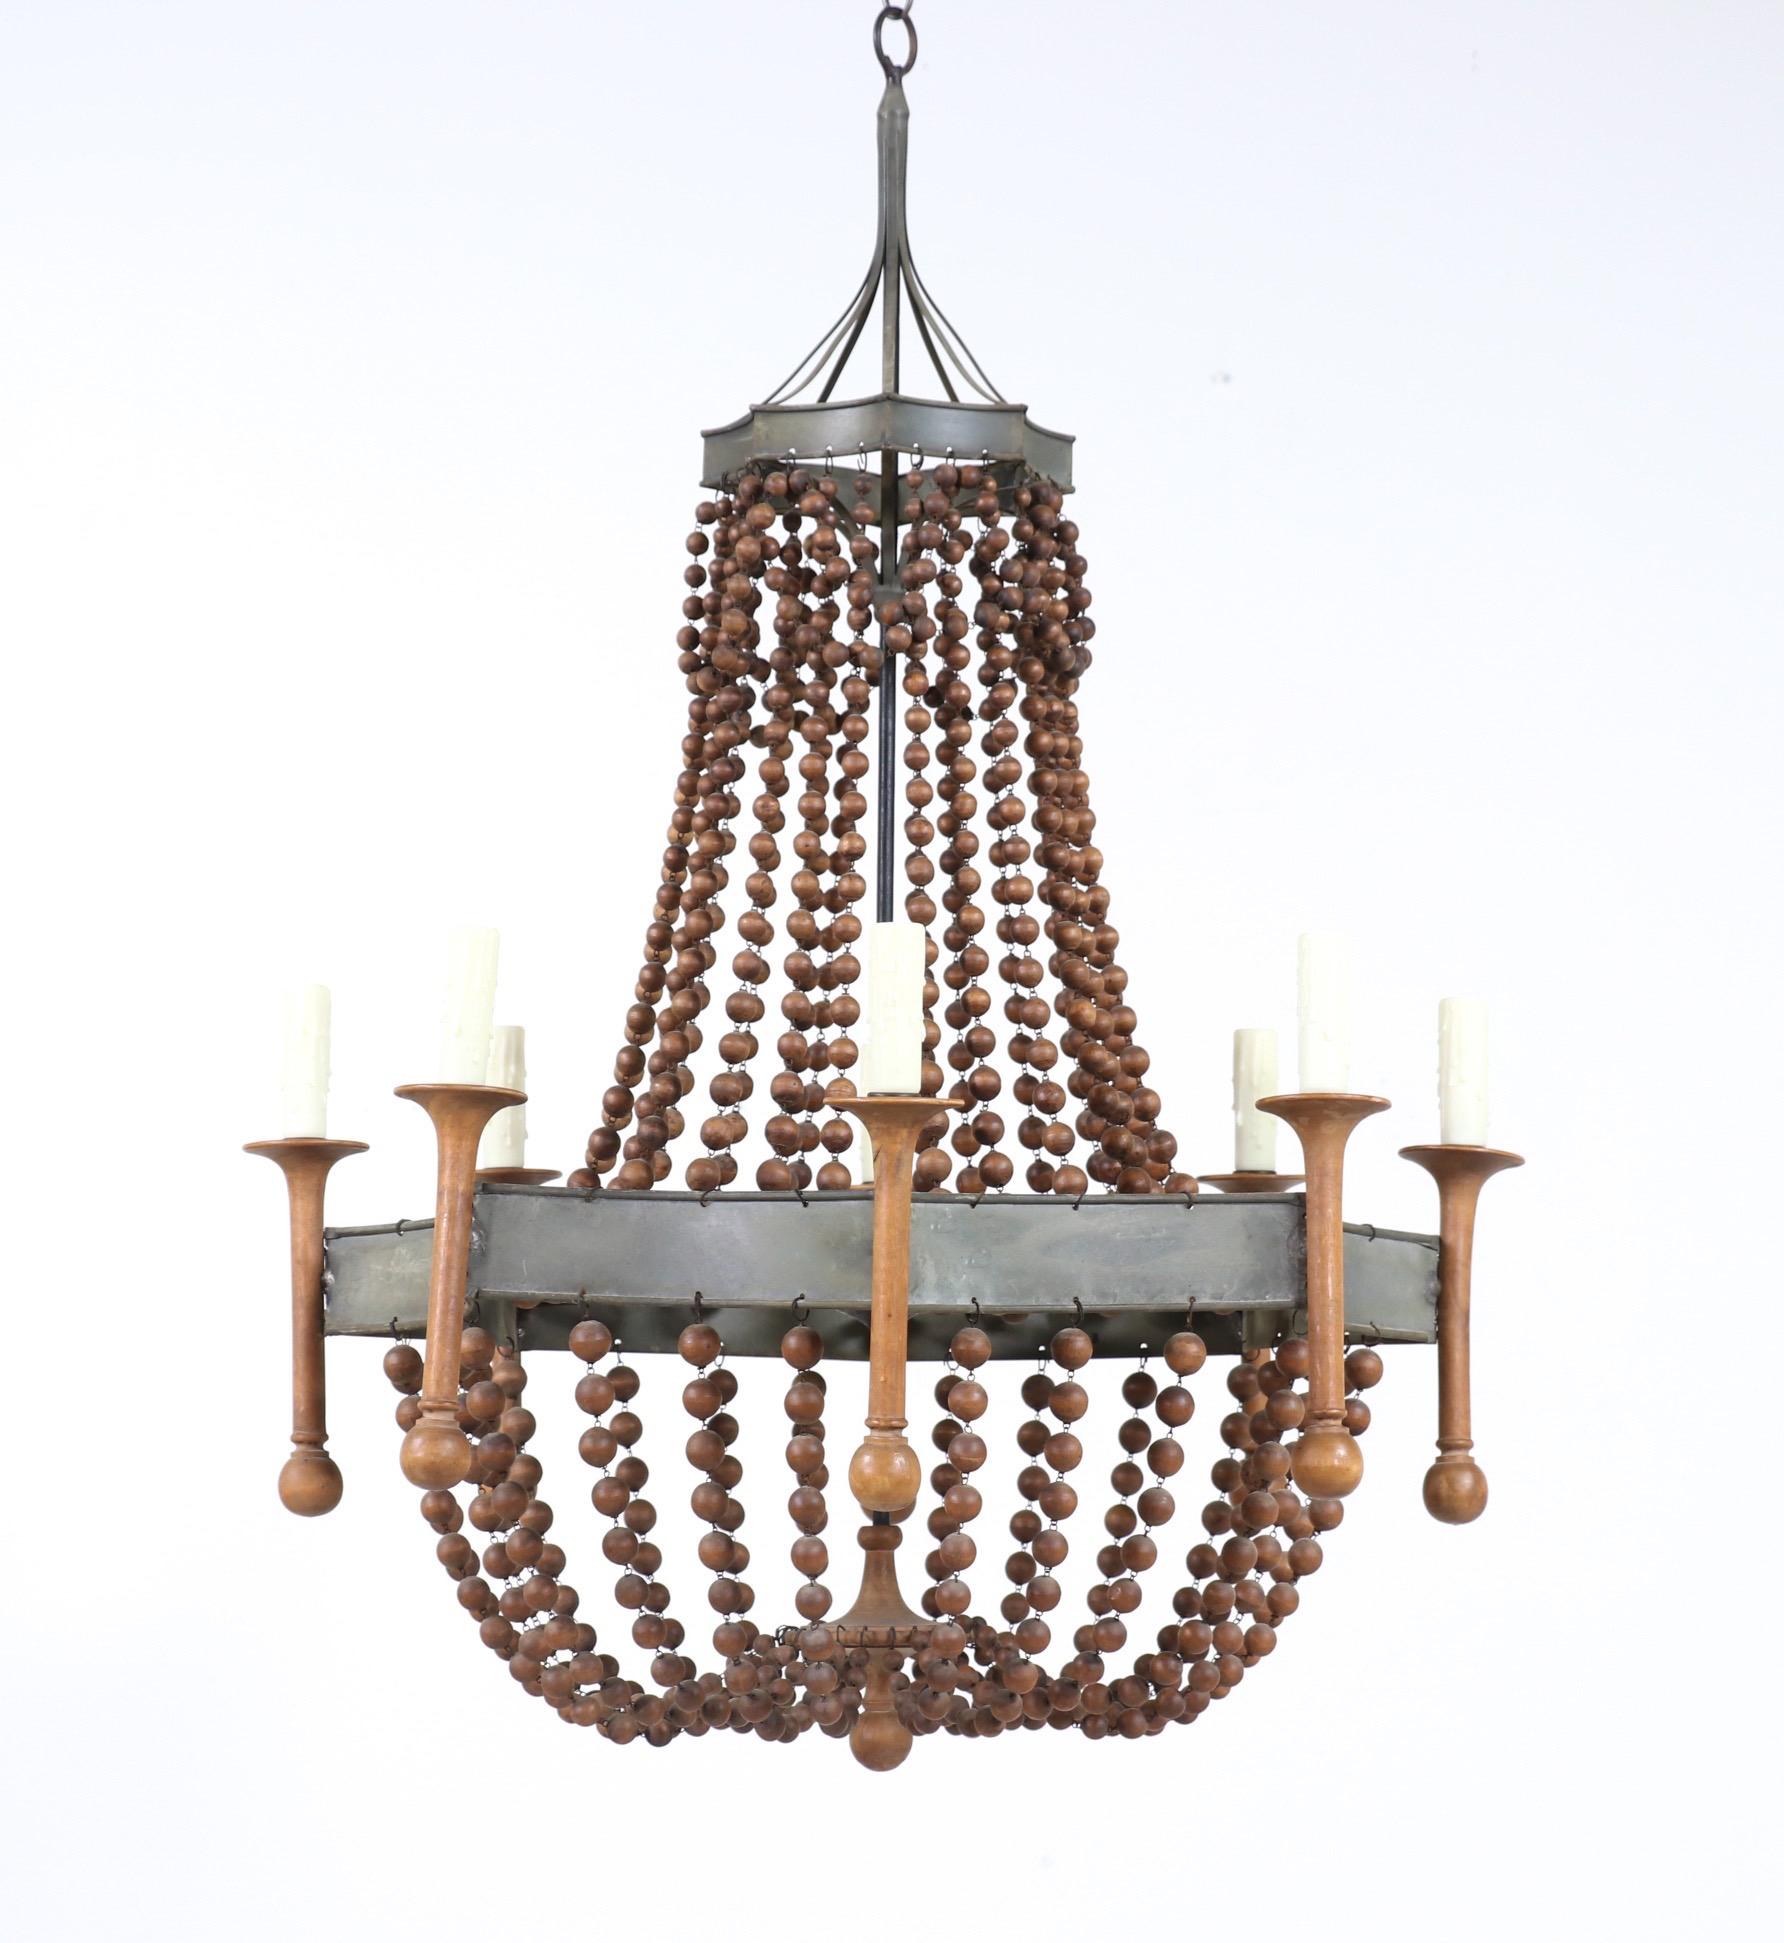 Impressive, 1960s Spanish wood beaded chandelier in the Empire style imported by Chapman Lighting.

Interior of chandelier is stamped: “Chapman, Made in Spain”. 

The chandelier consists of an octagon-shaped metal frame with strands of wood